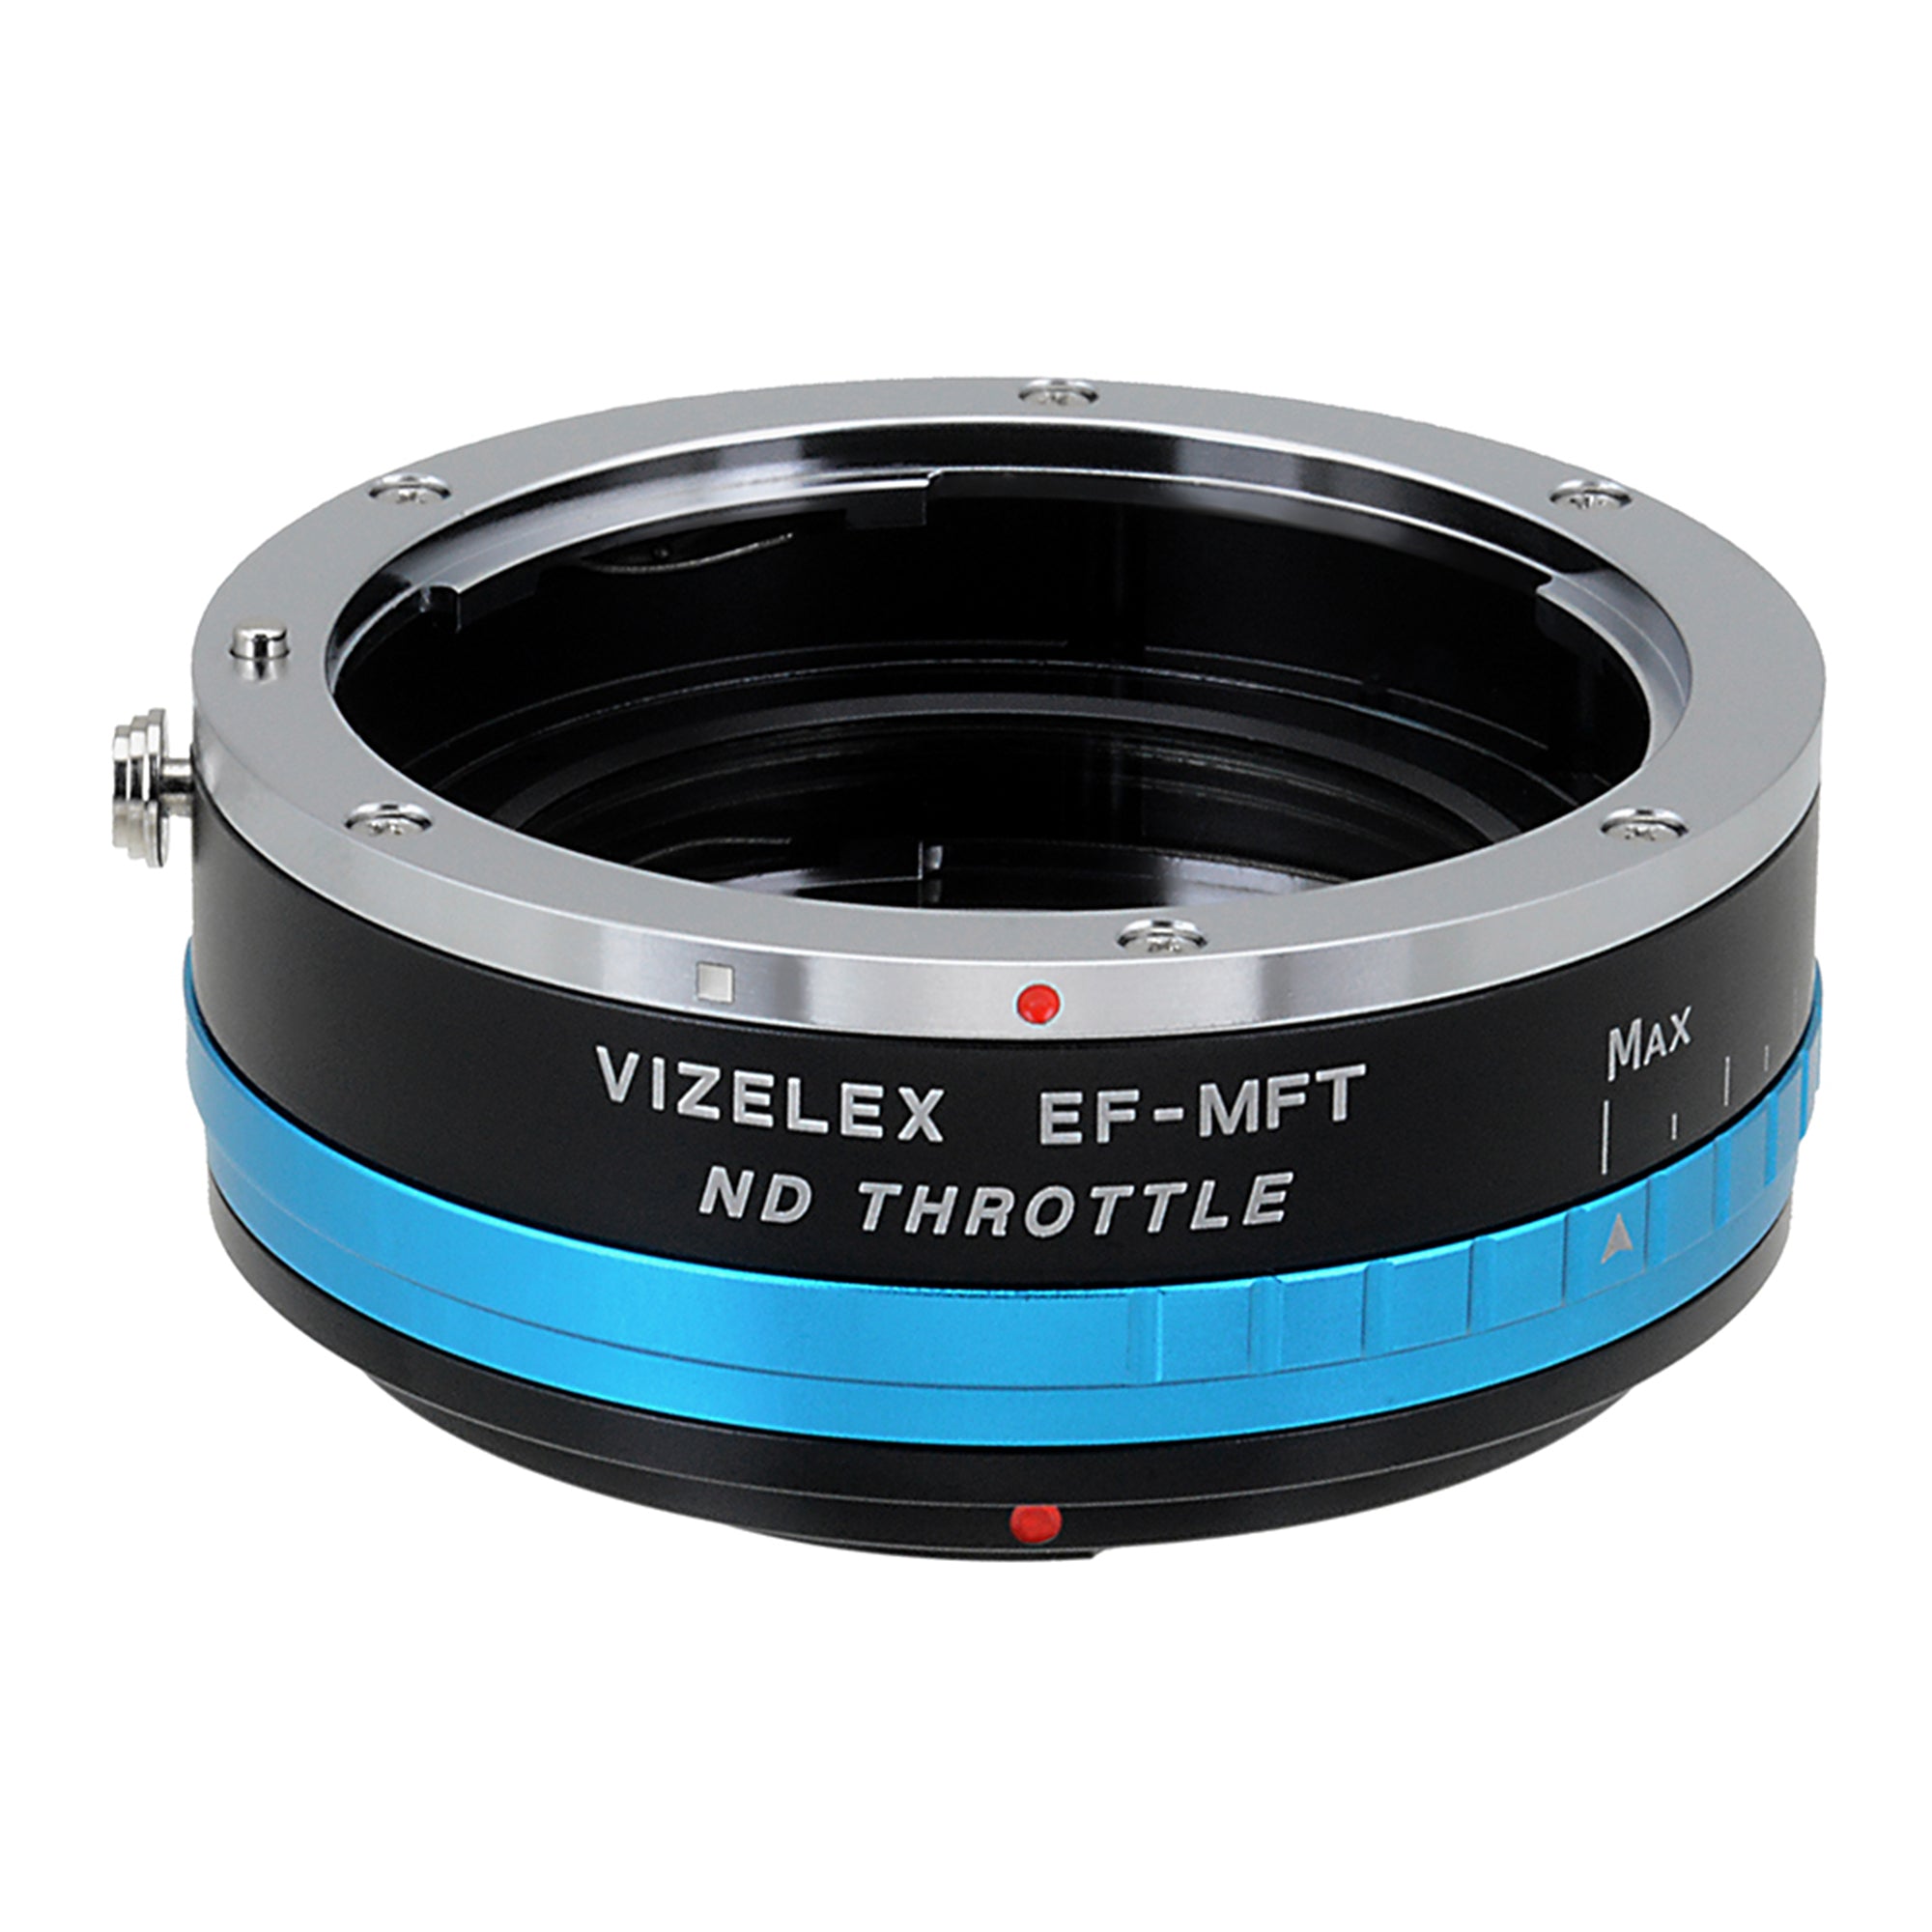 Vizelex ND Throttle Lens Mount Adapter - Olympus Zuiko (OM) 35mm SLR Lens to Micro Four Thirds (MFT, M4/3) Mount Mirrorless Camera Body, with Built-In Variable ND Filter (2 to 8 Stops)